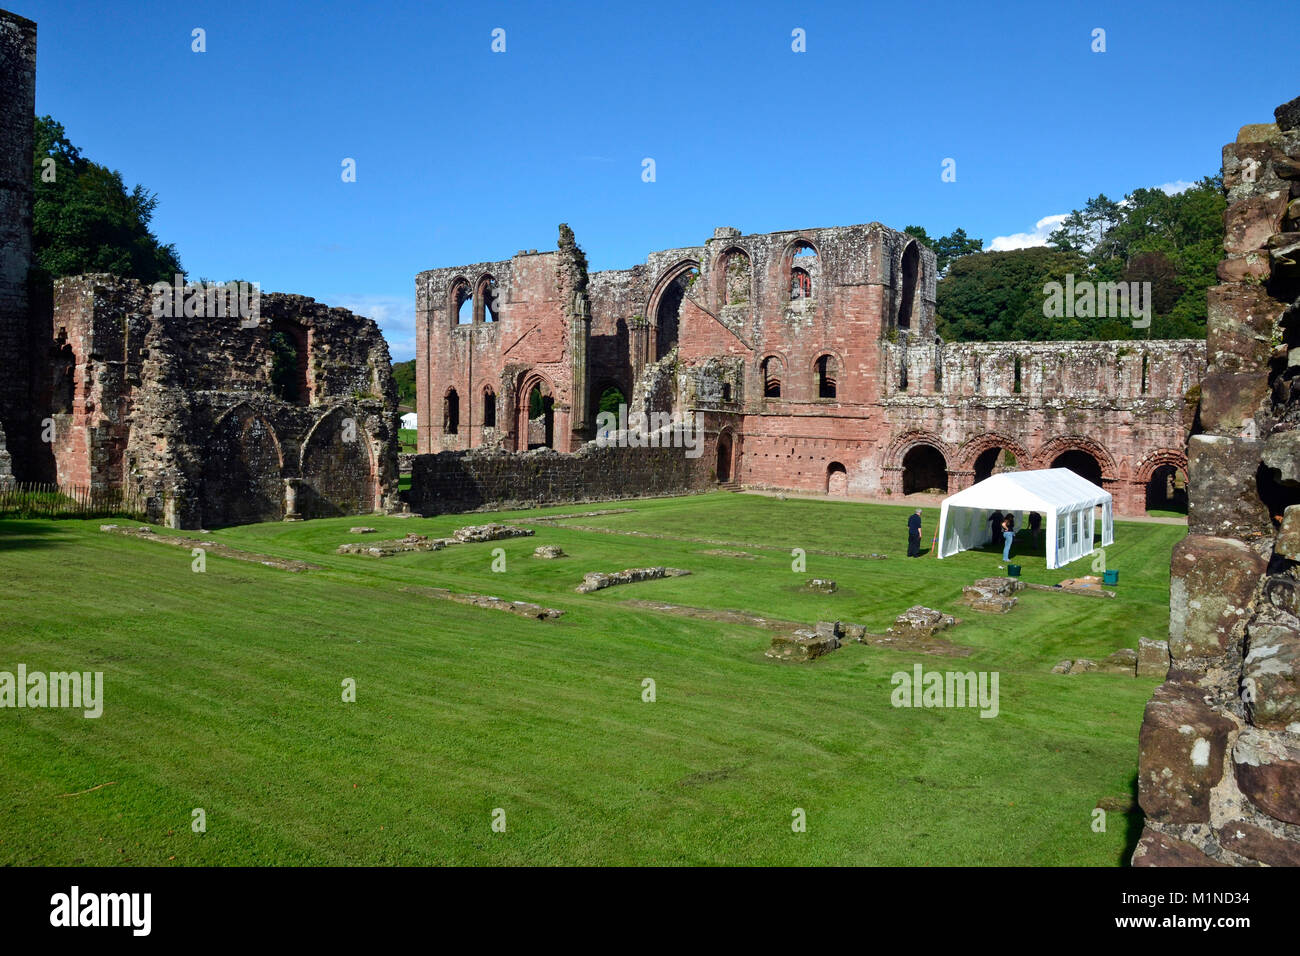 Furness Abbey, Barrow-in-Furness, Cumbria. 12th century ruined monastery managed by English Heritage. UK Stock Photo